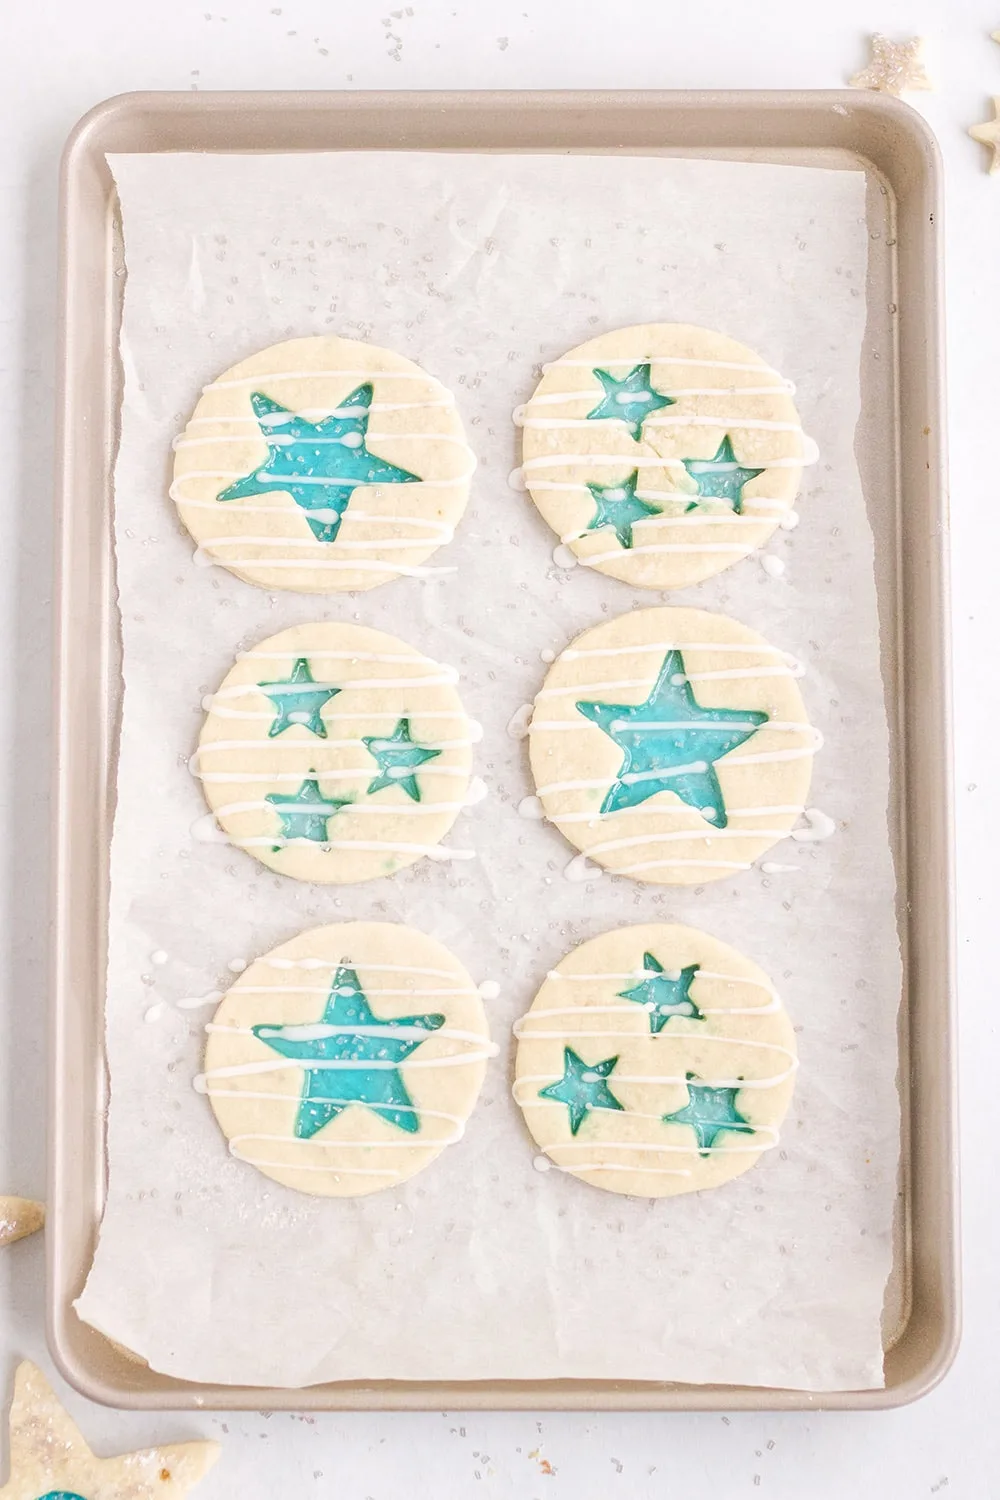 Star stained-glass cookies on a baking sheet ready for the oven. 